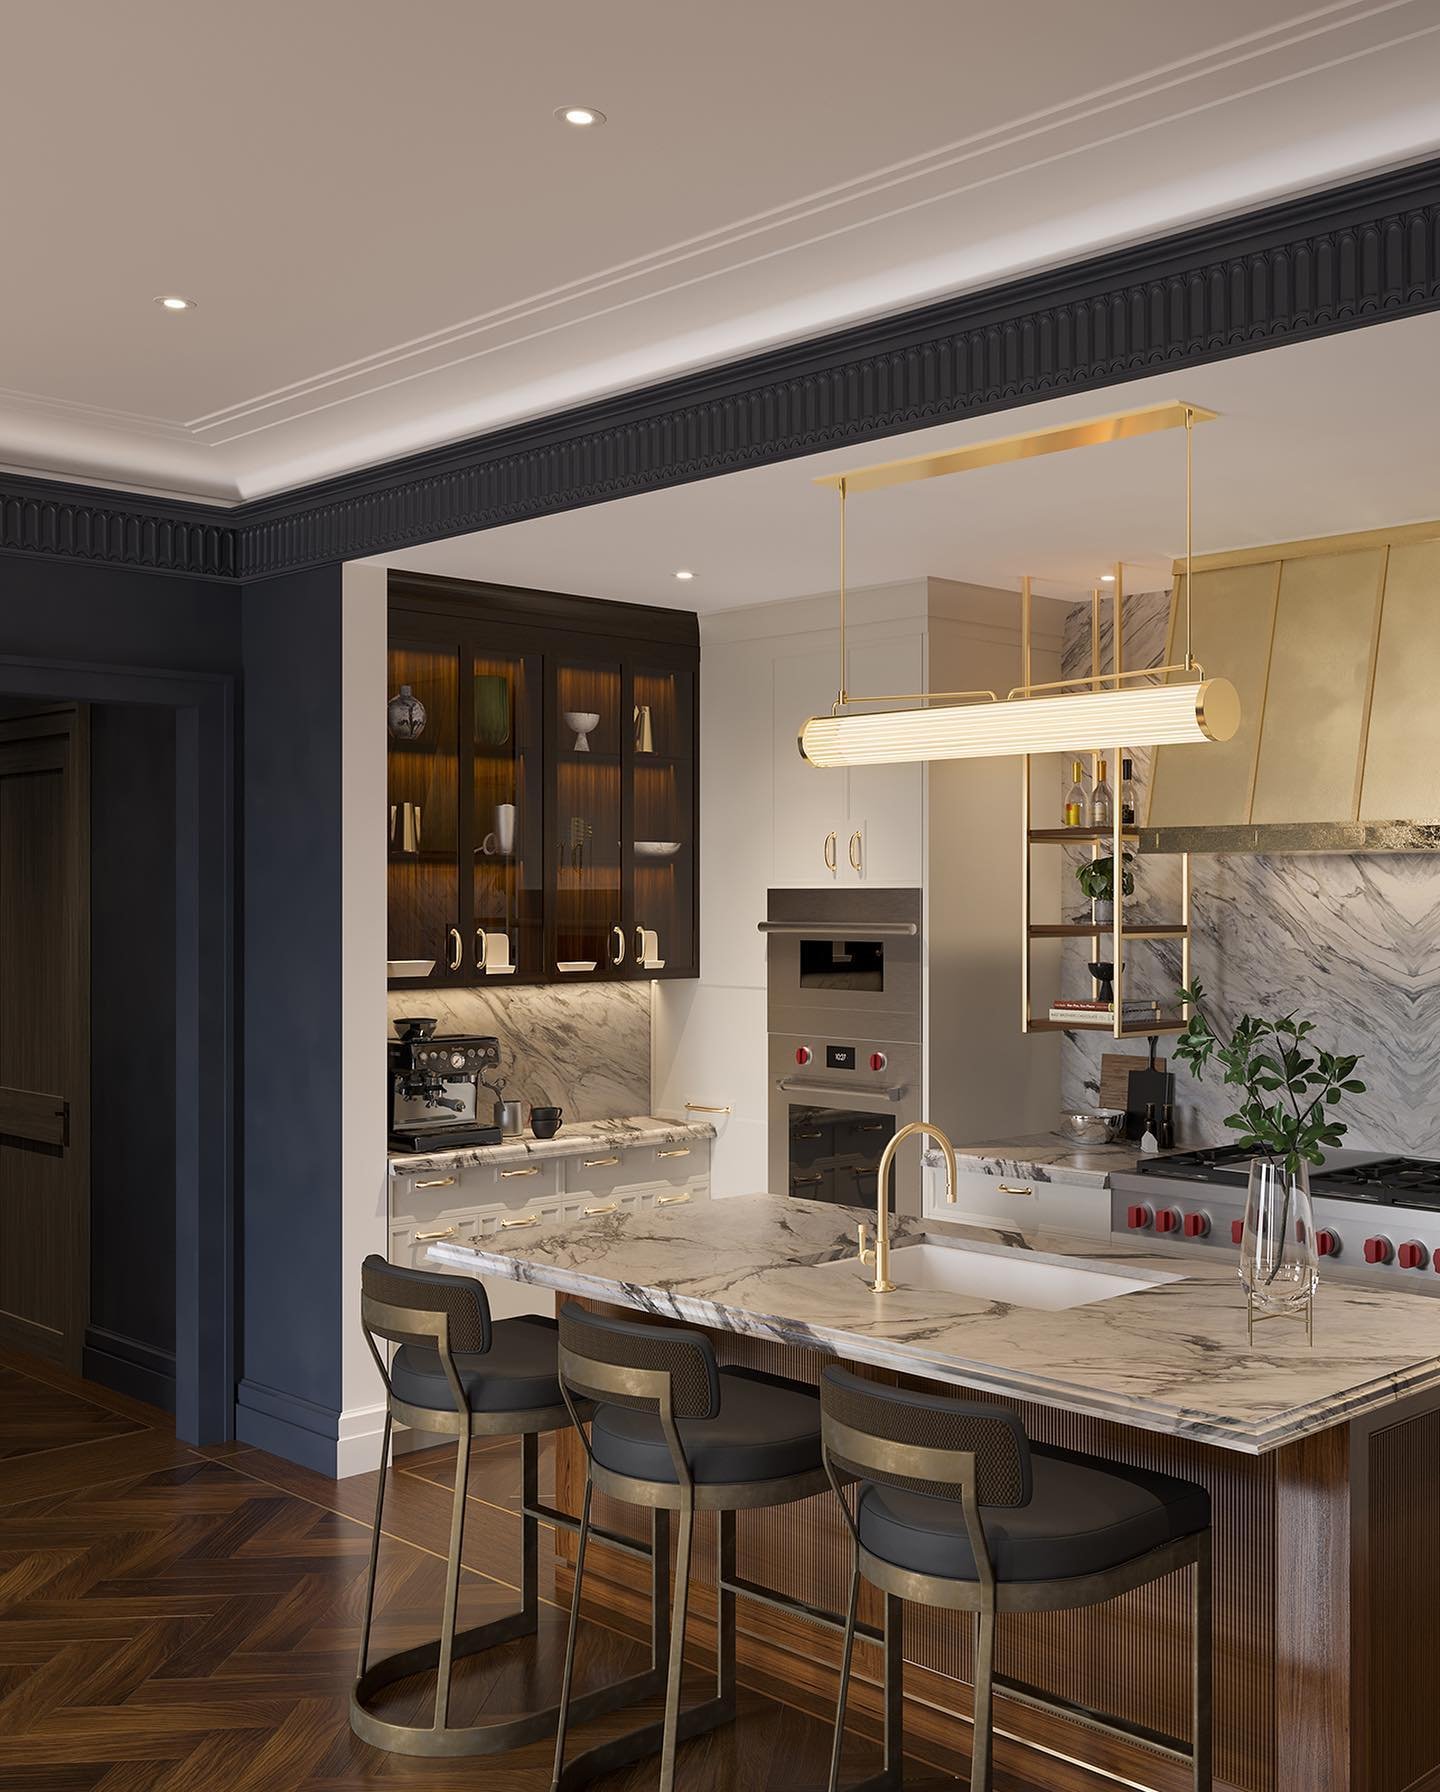 A glimpse into our moderne kitchens for a luxury development concept.  Our client asked us to design something that felt timeless, luxurious, anti-trend.  Key Words: Debonnaire, James Bond, Distinguished. 

Stools: @theheathercompany 
Light fixture: 